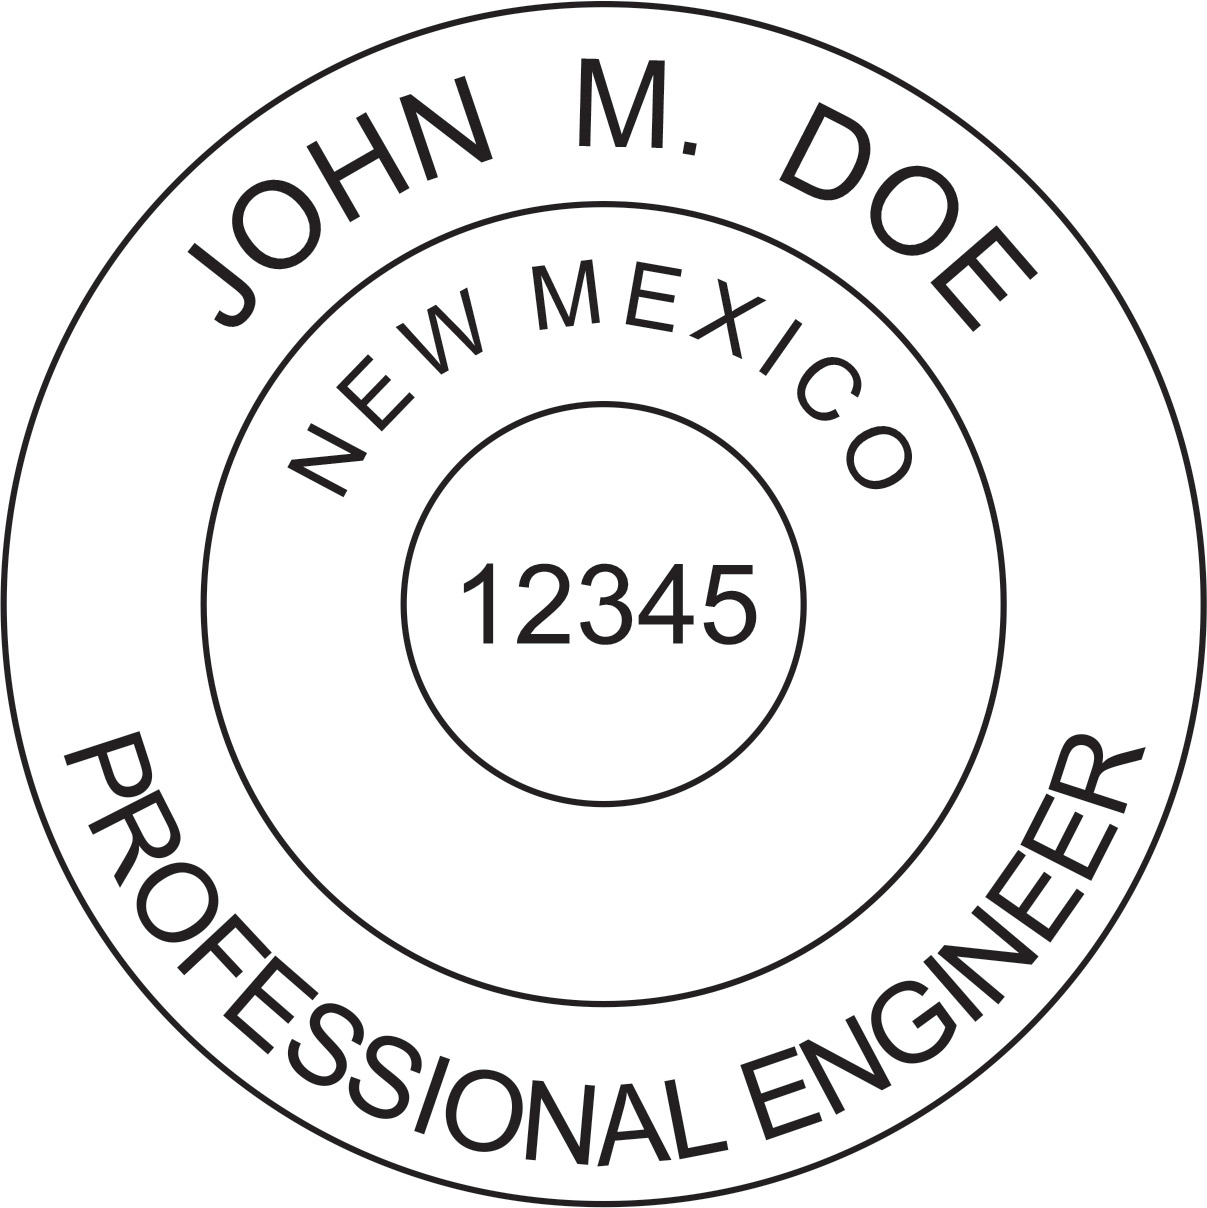 Engineer Seal - Desk Top Style - New Mexico